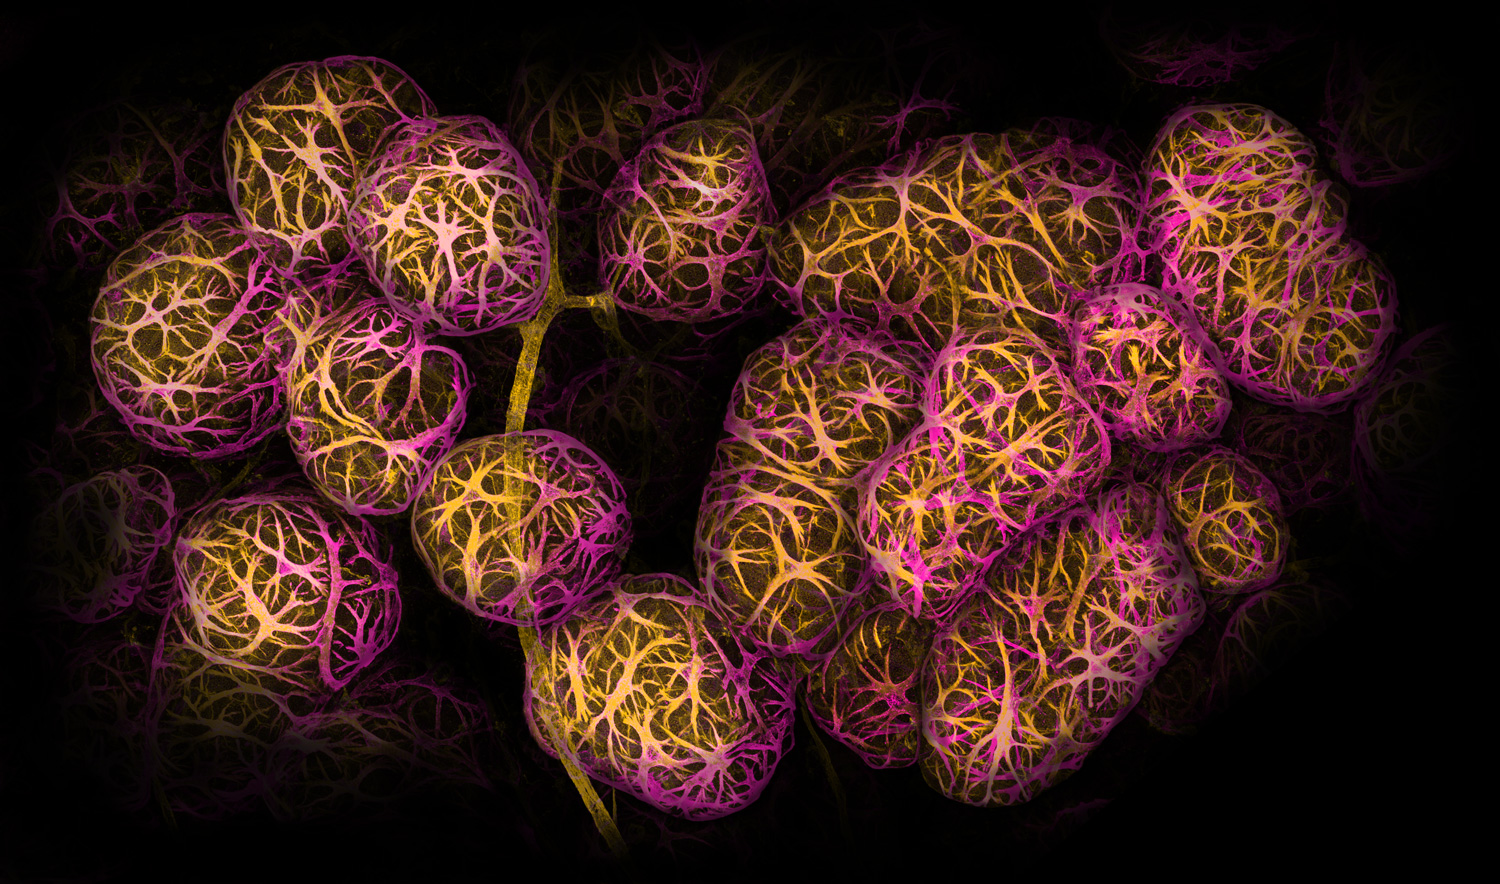 a ball-like structure of magenta and yellow clustered around a blood vessel, colored yellow against a black background.